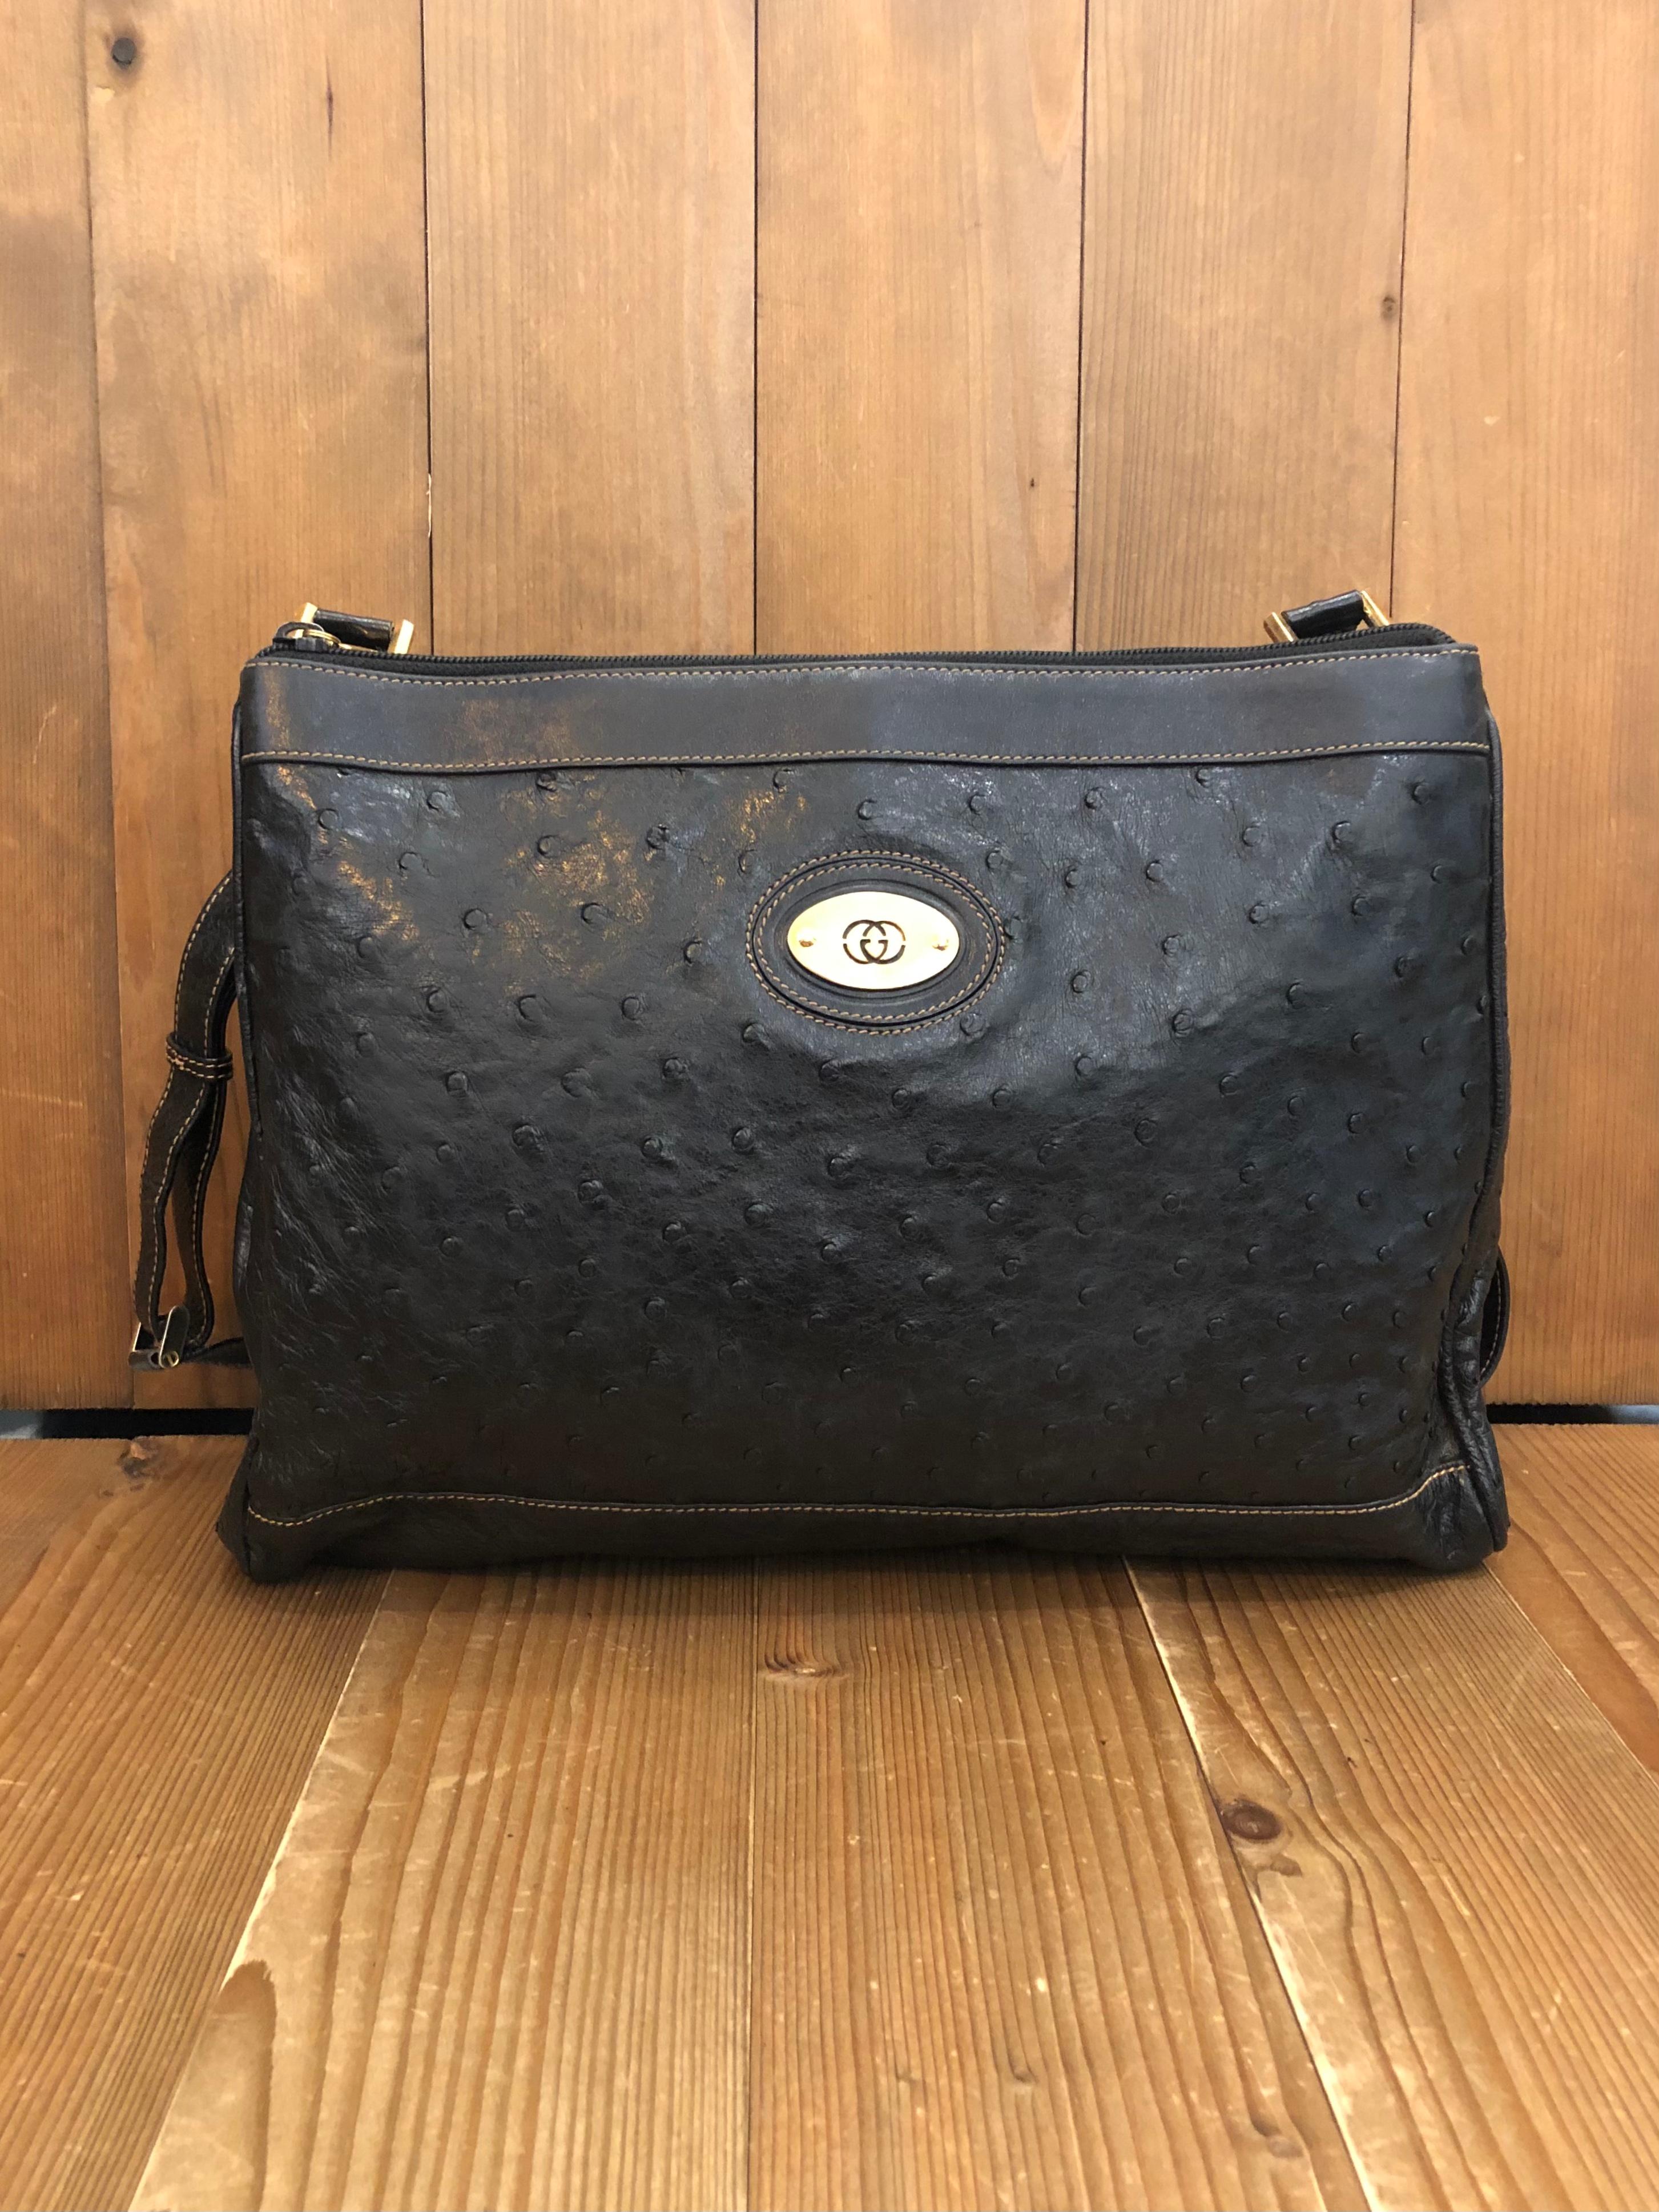 1980s Gucci messenger bag in black ostrich leather featuring gold toned hardware and all black suede leather interior. The strap of the same leather can be adjusted to wear it as a shoulder or crossbody bag. This messenger bag has two spacious